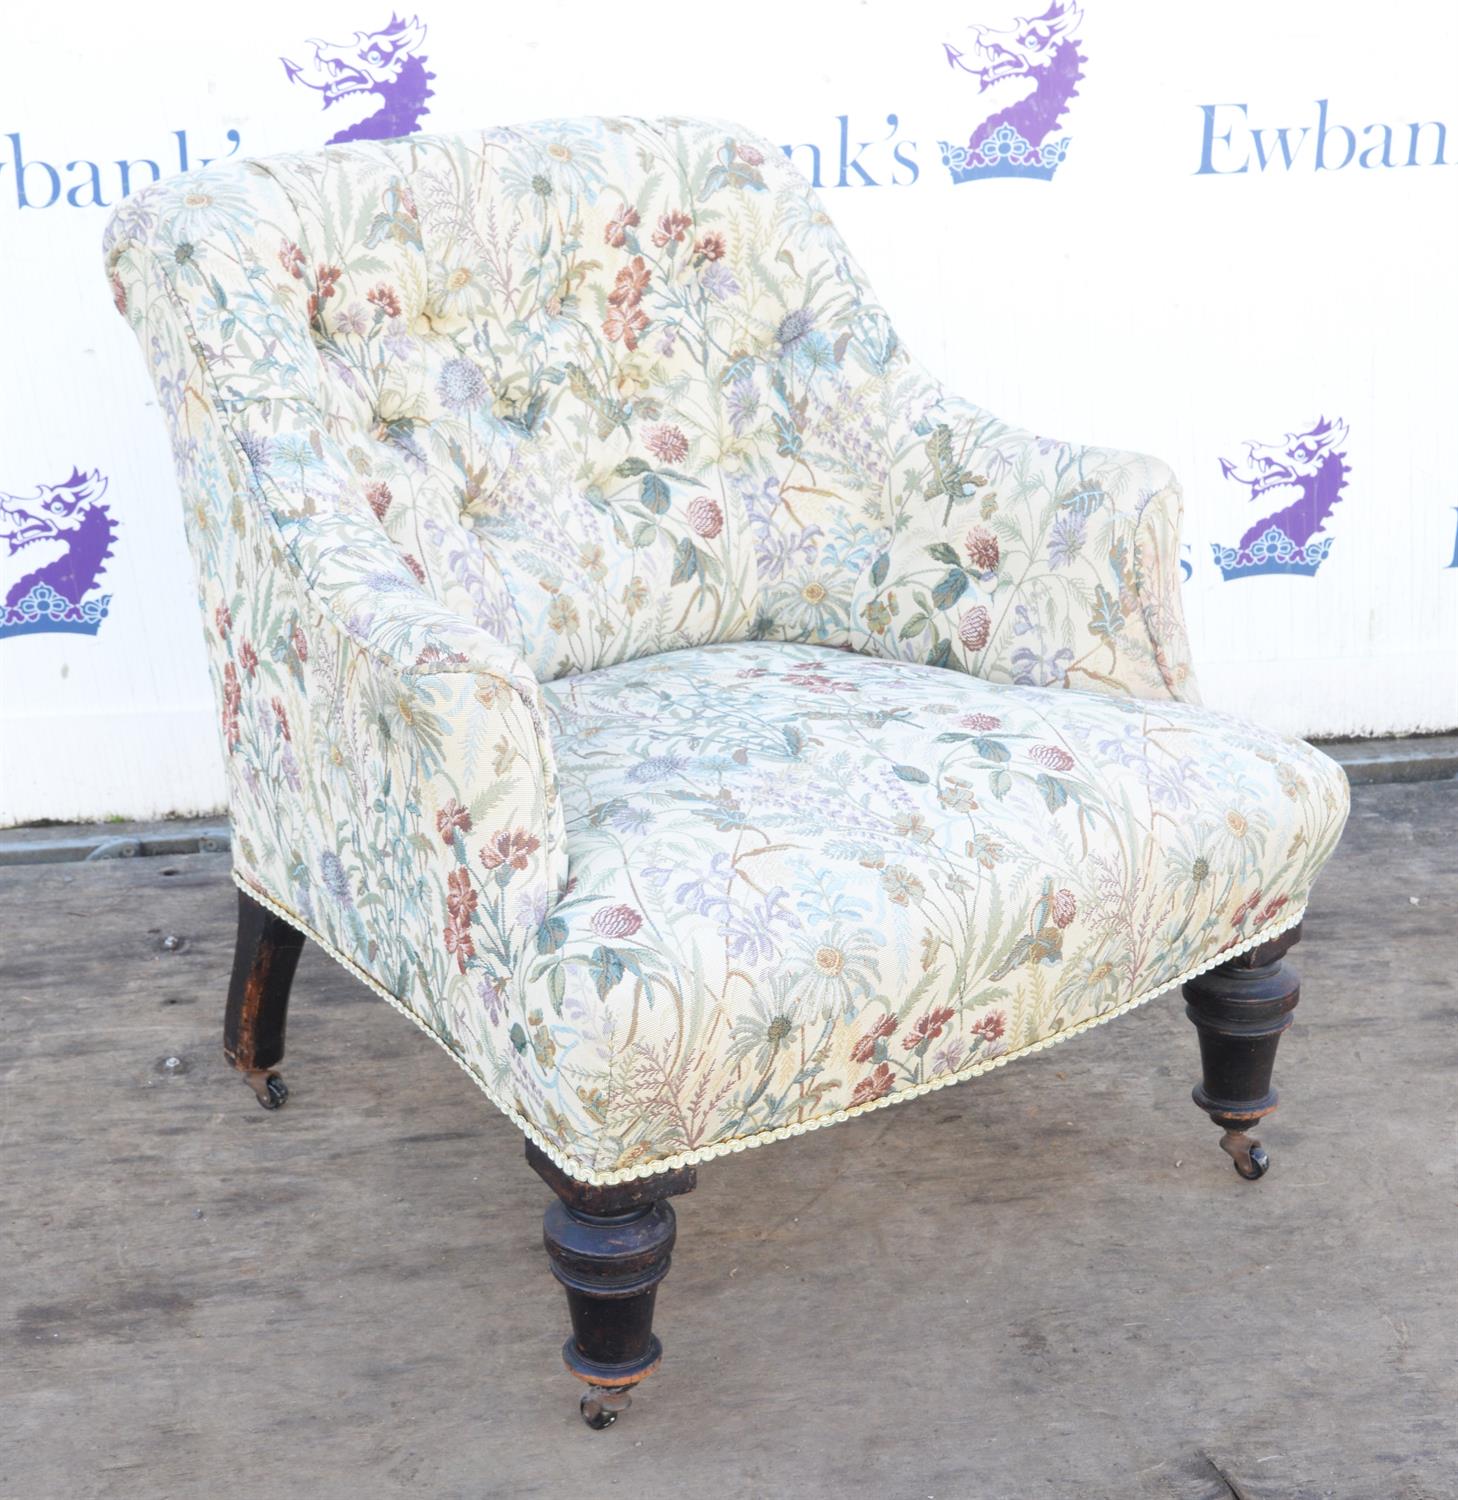 Victorian armchair, upholstered in floral material with button back design, 73cm high